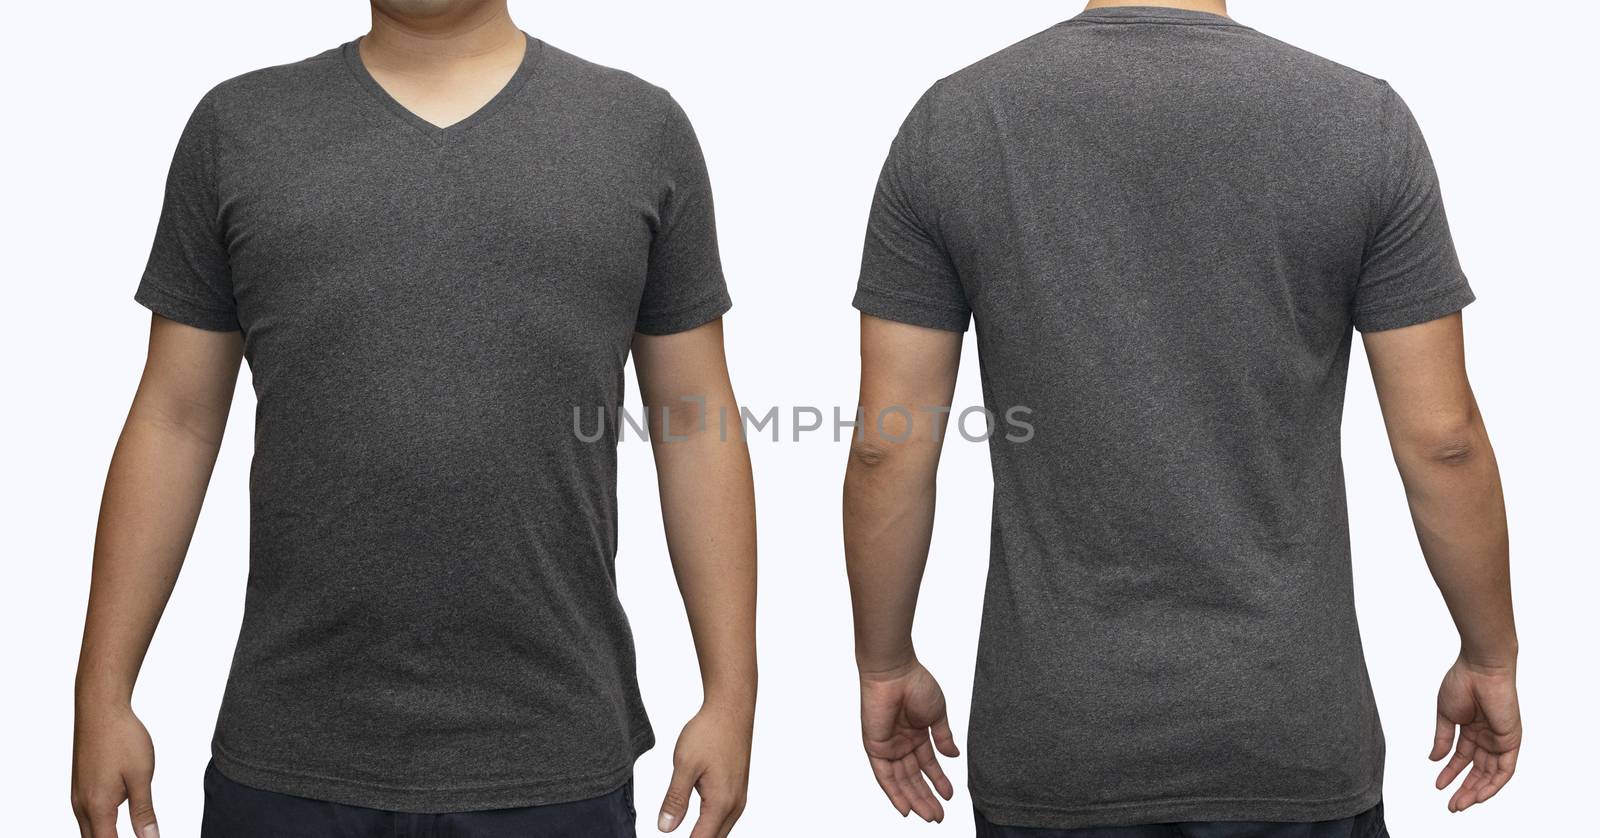 Grey blank v-neck t-shirt on human body for graphic design mock up